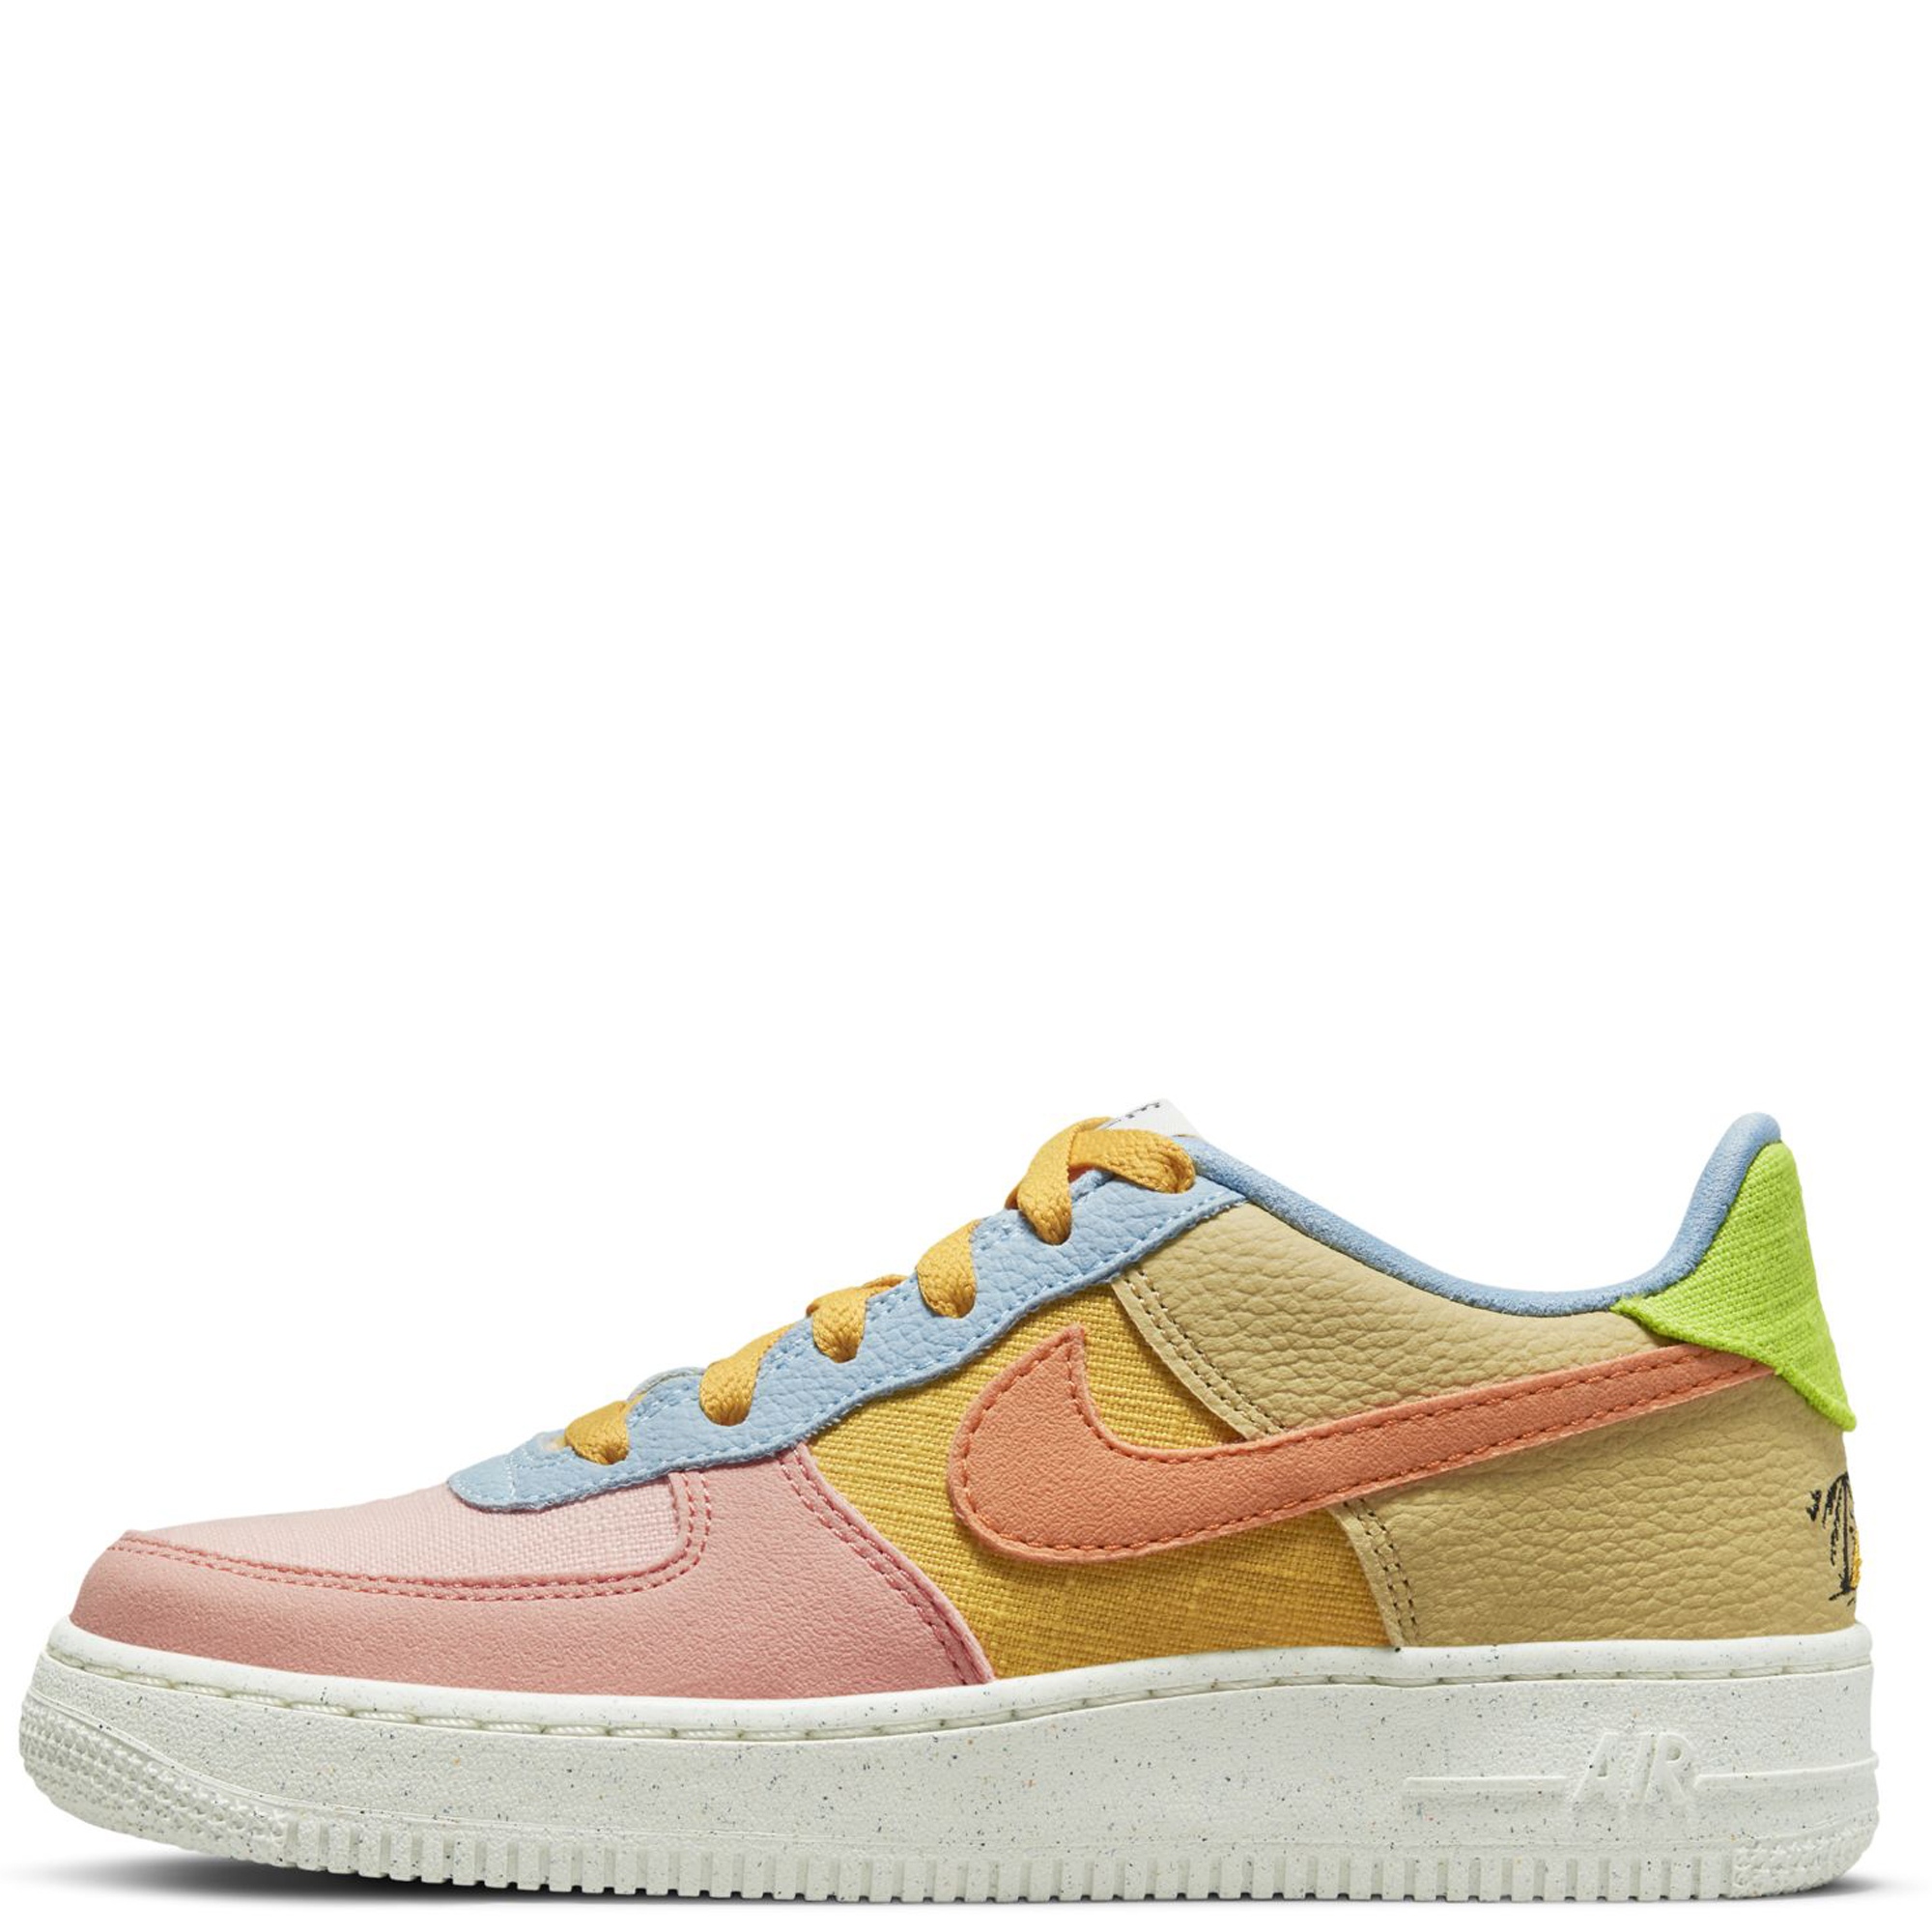 NIKE Air Force 1 Mid '07 LV8 Next Nature DM0119-100 Sail Wheat Grass  Sanded Gold